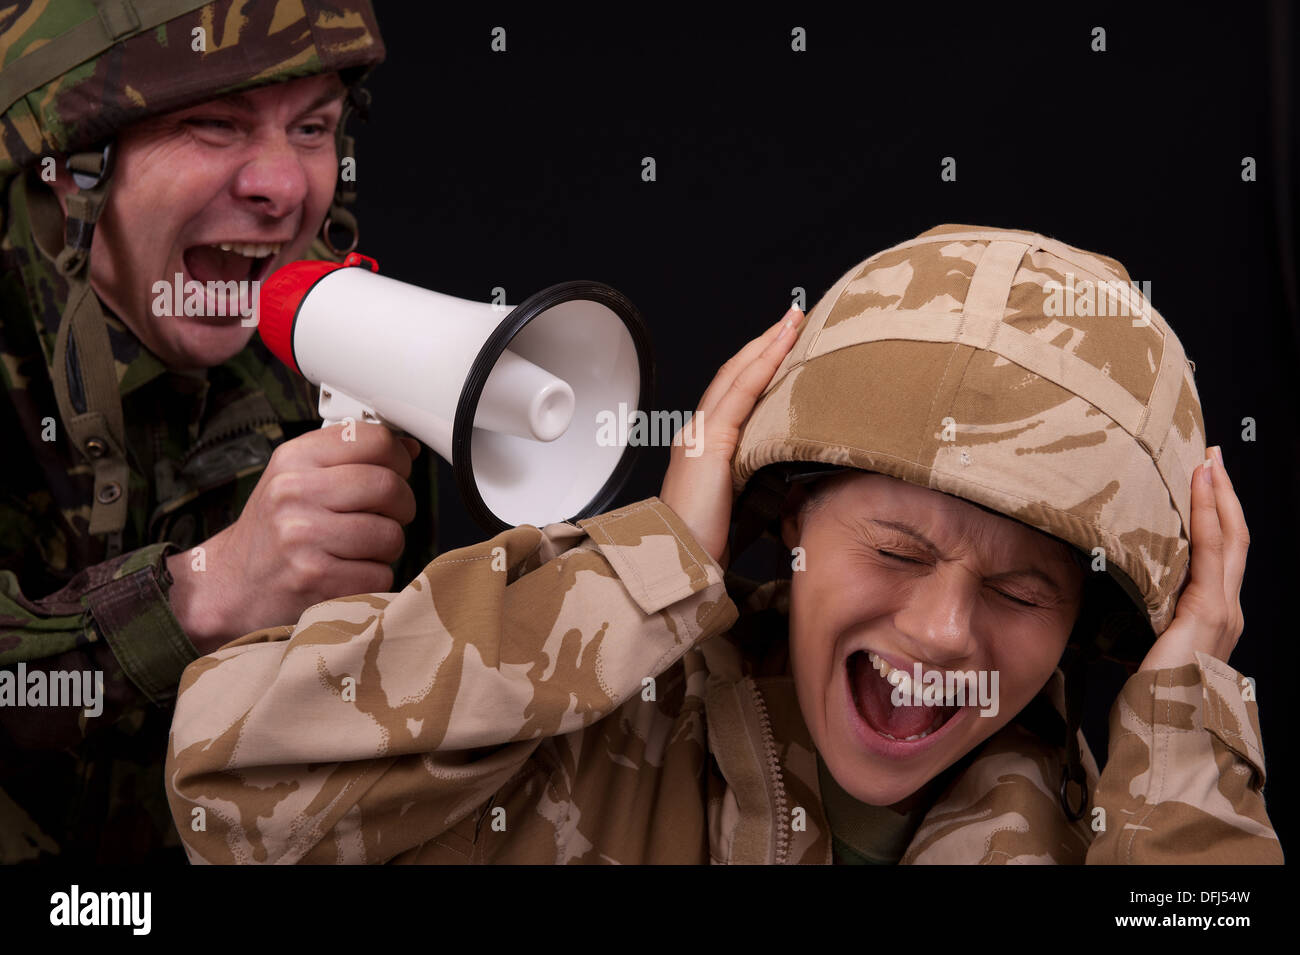 Male soldier shouting orders to a distraught female soldier with the use of a small hand held loudspeaker. British uniforms. Stock Photo